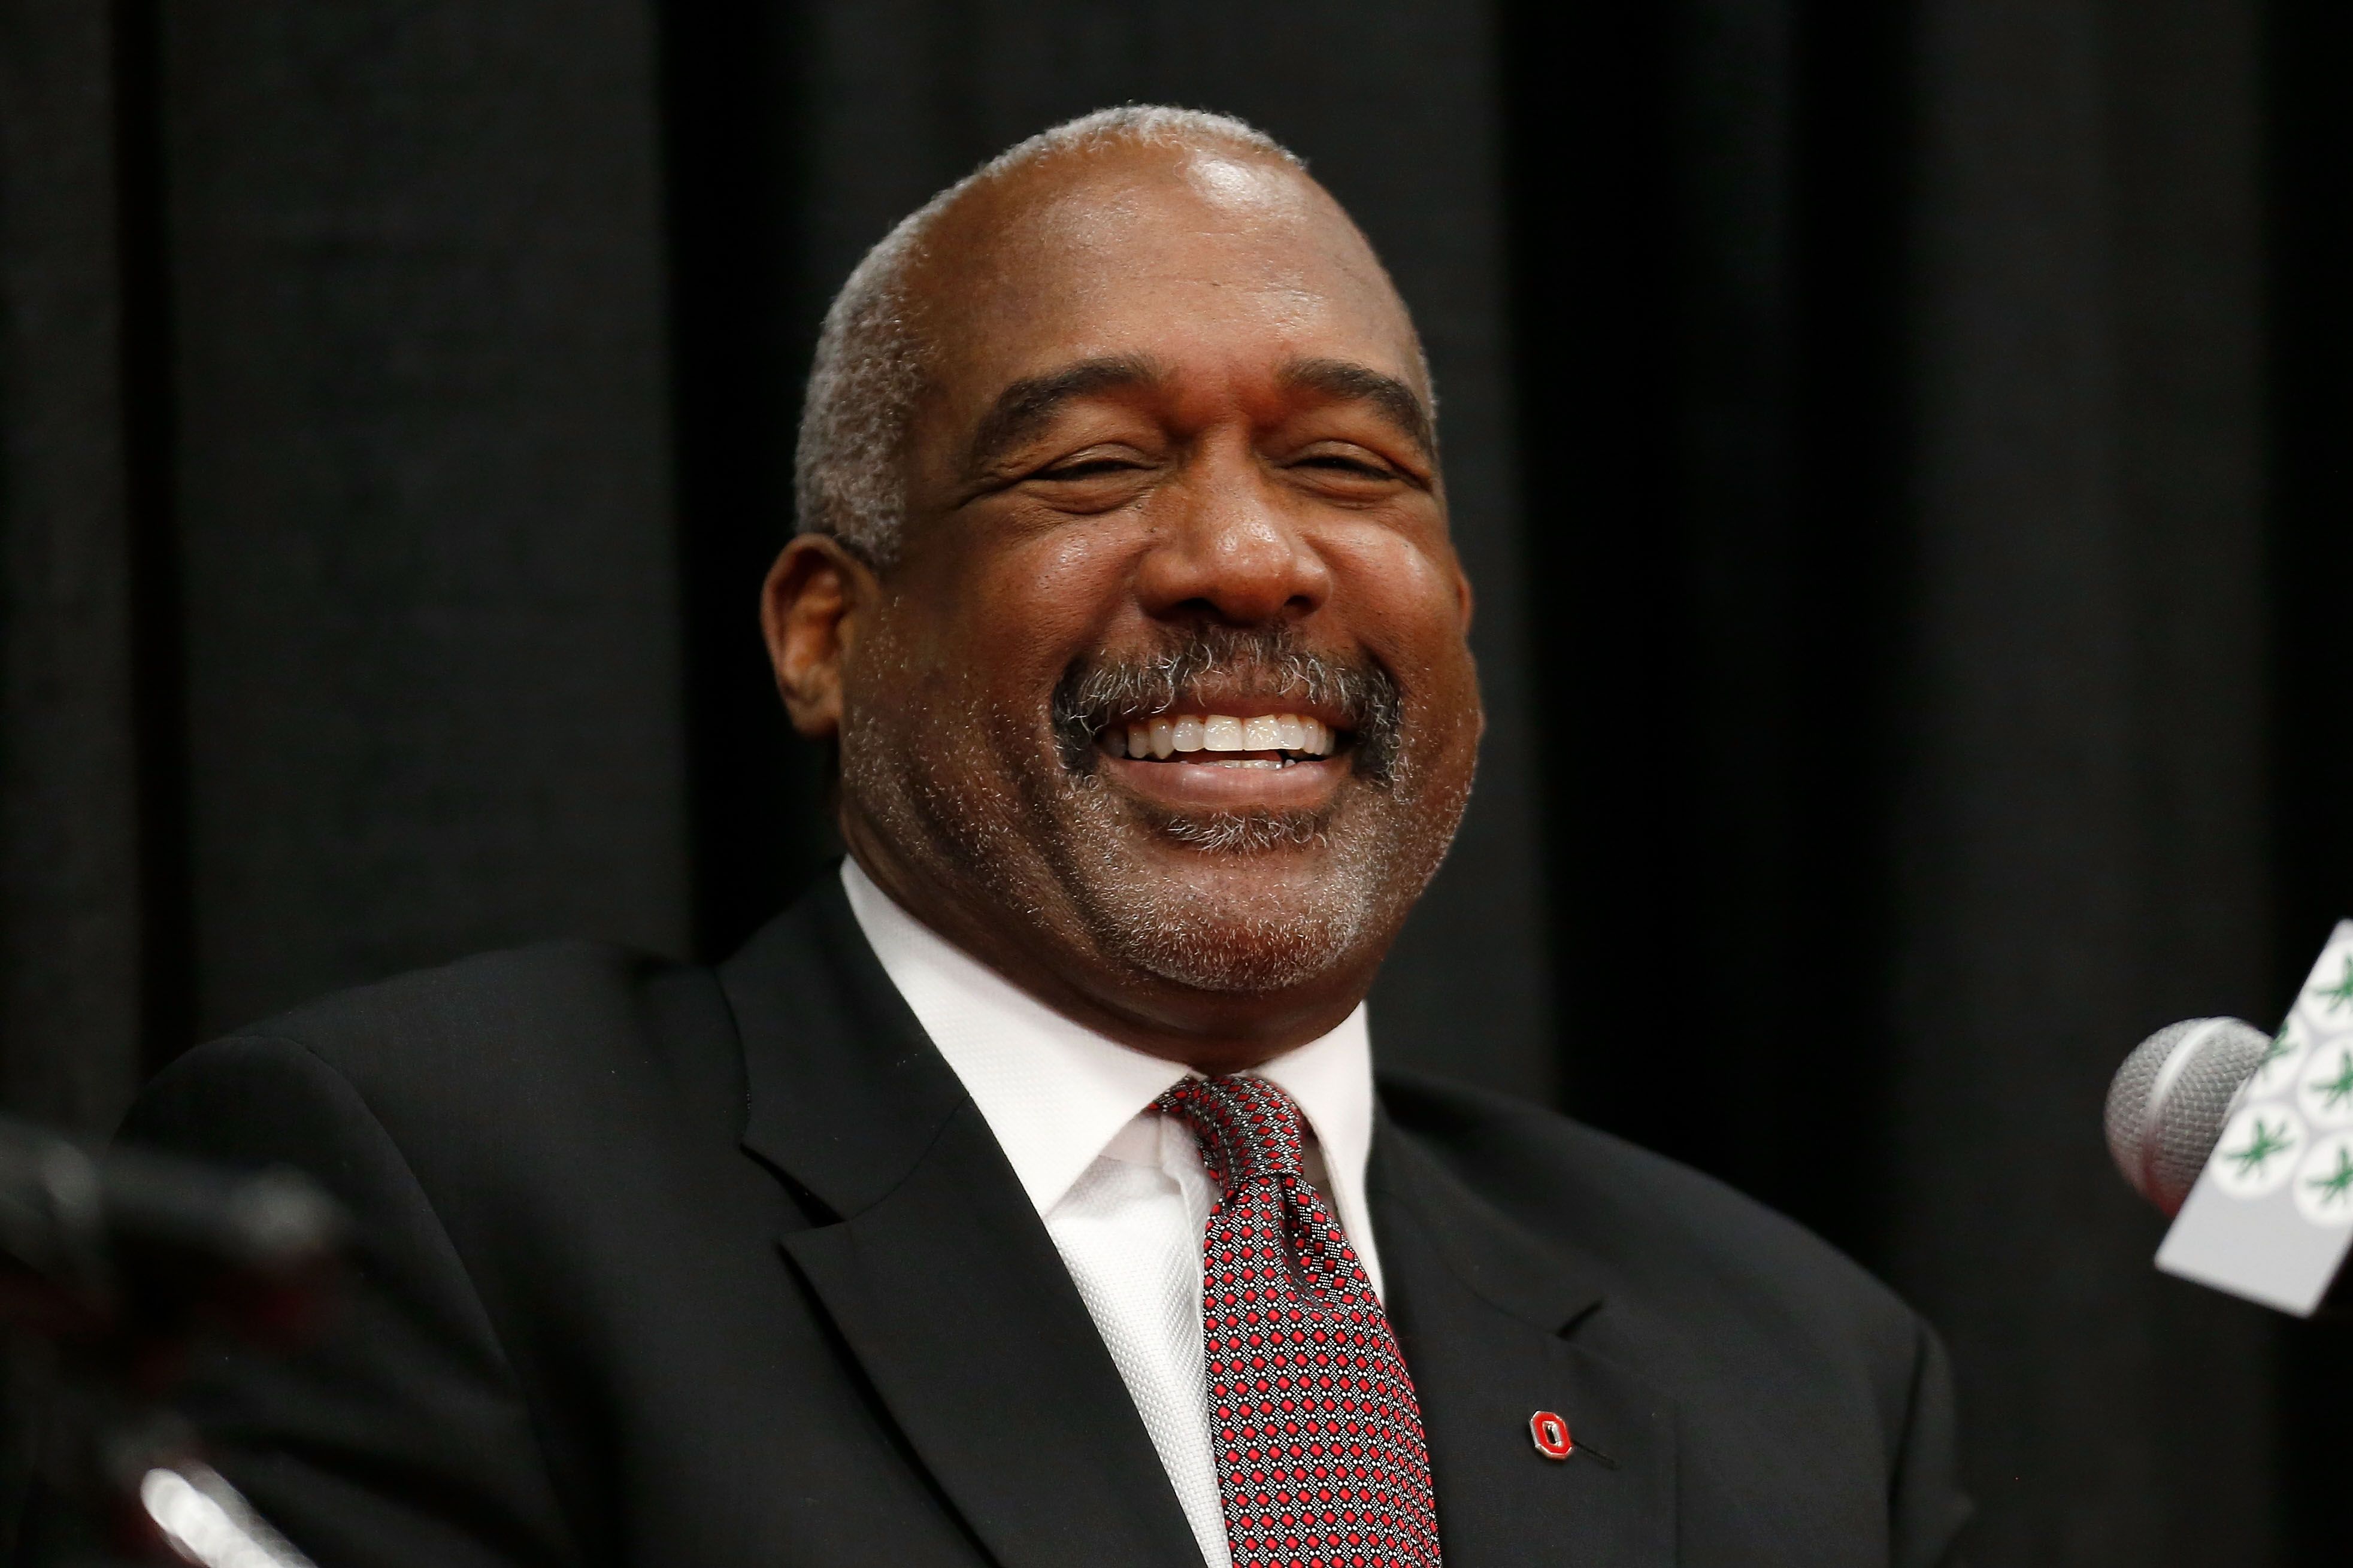 OSU athletic director Gene Smith laughing at a press conference.